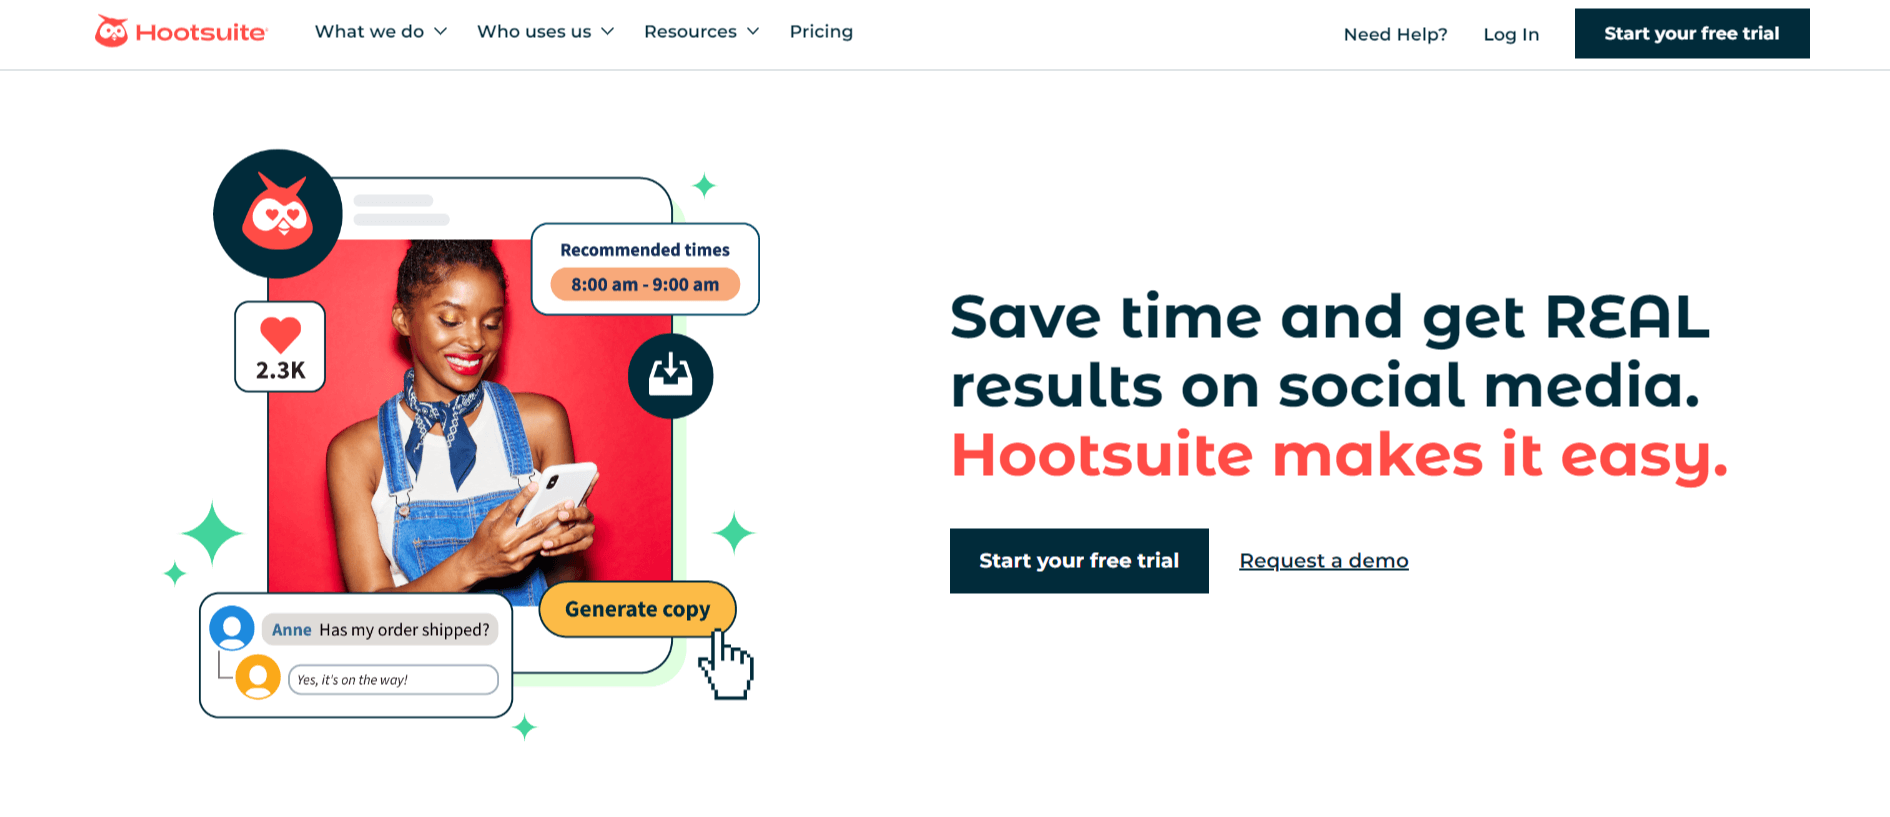 Hootsuite homepage with headline "Save time and get real results on social media. Hootsuite makes it easy."